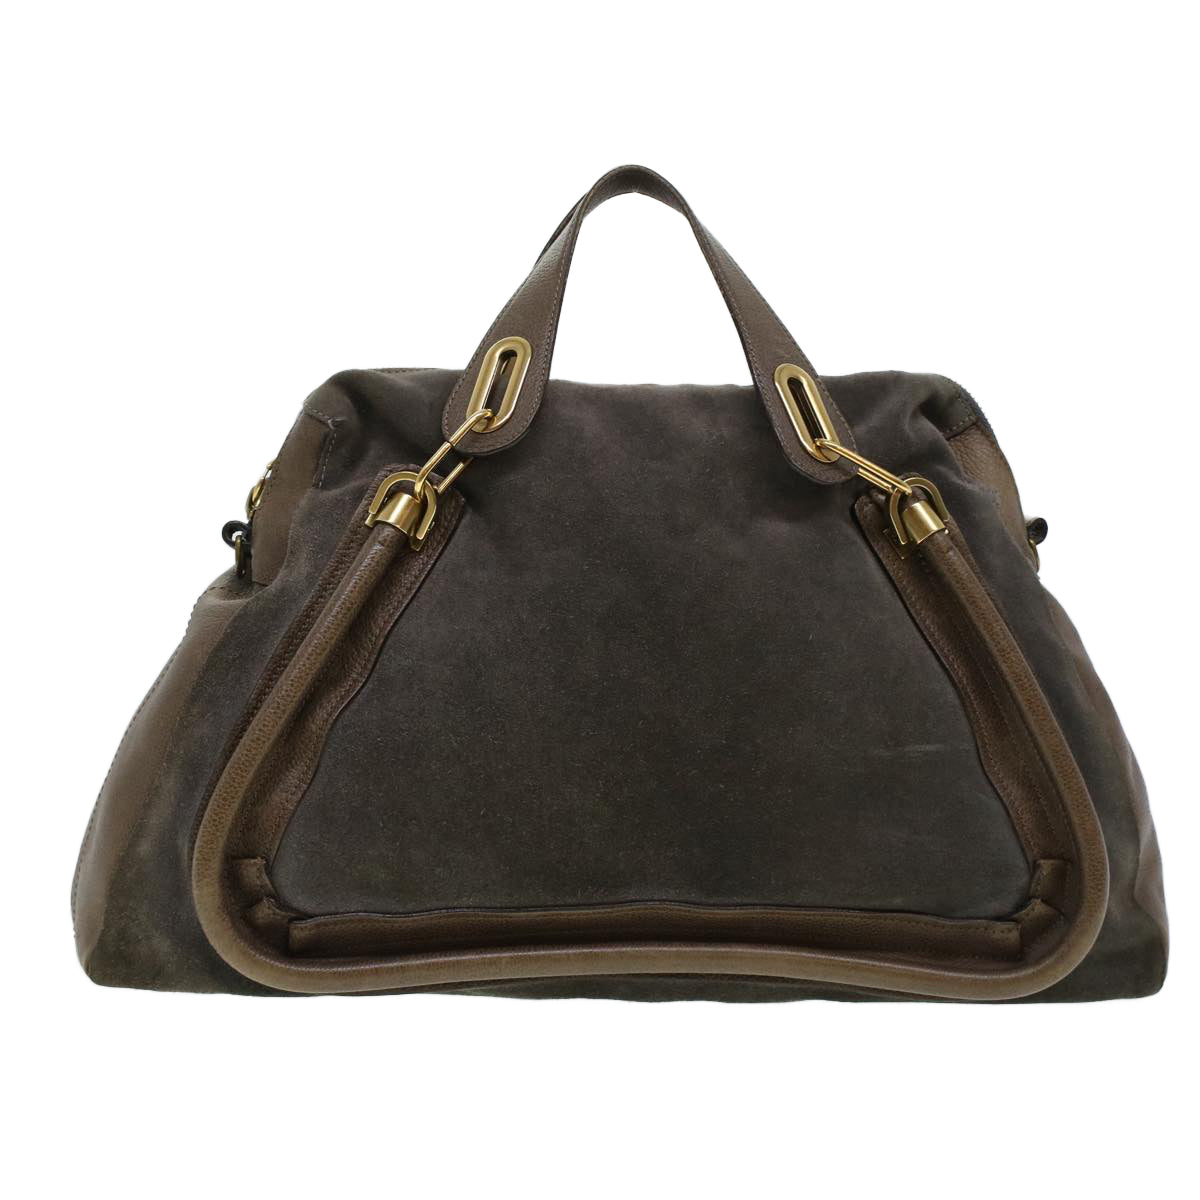 Chloe Paraty Hand Bag Leather Brown Auth 44038